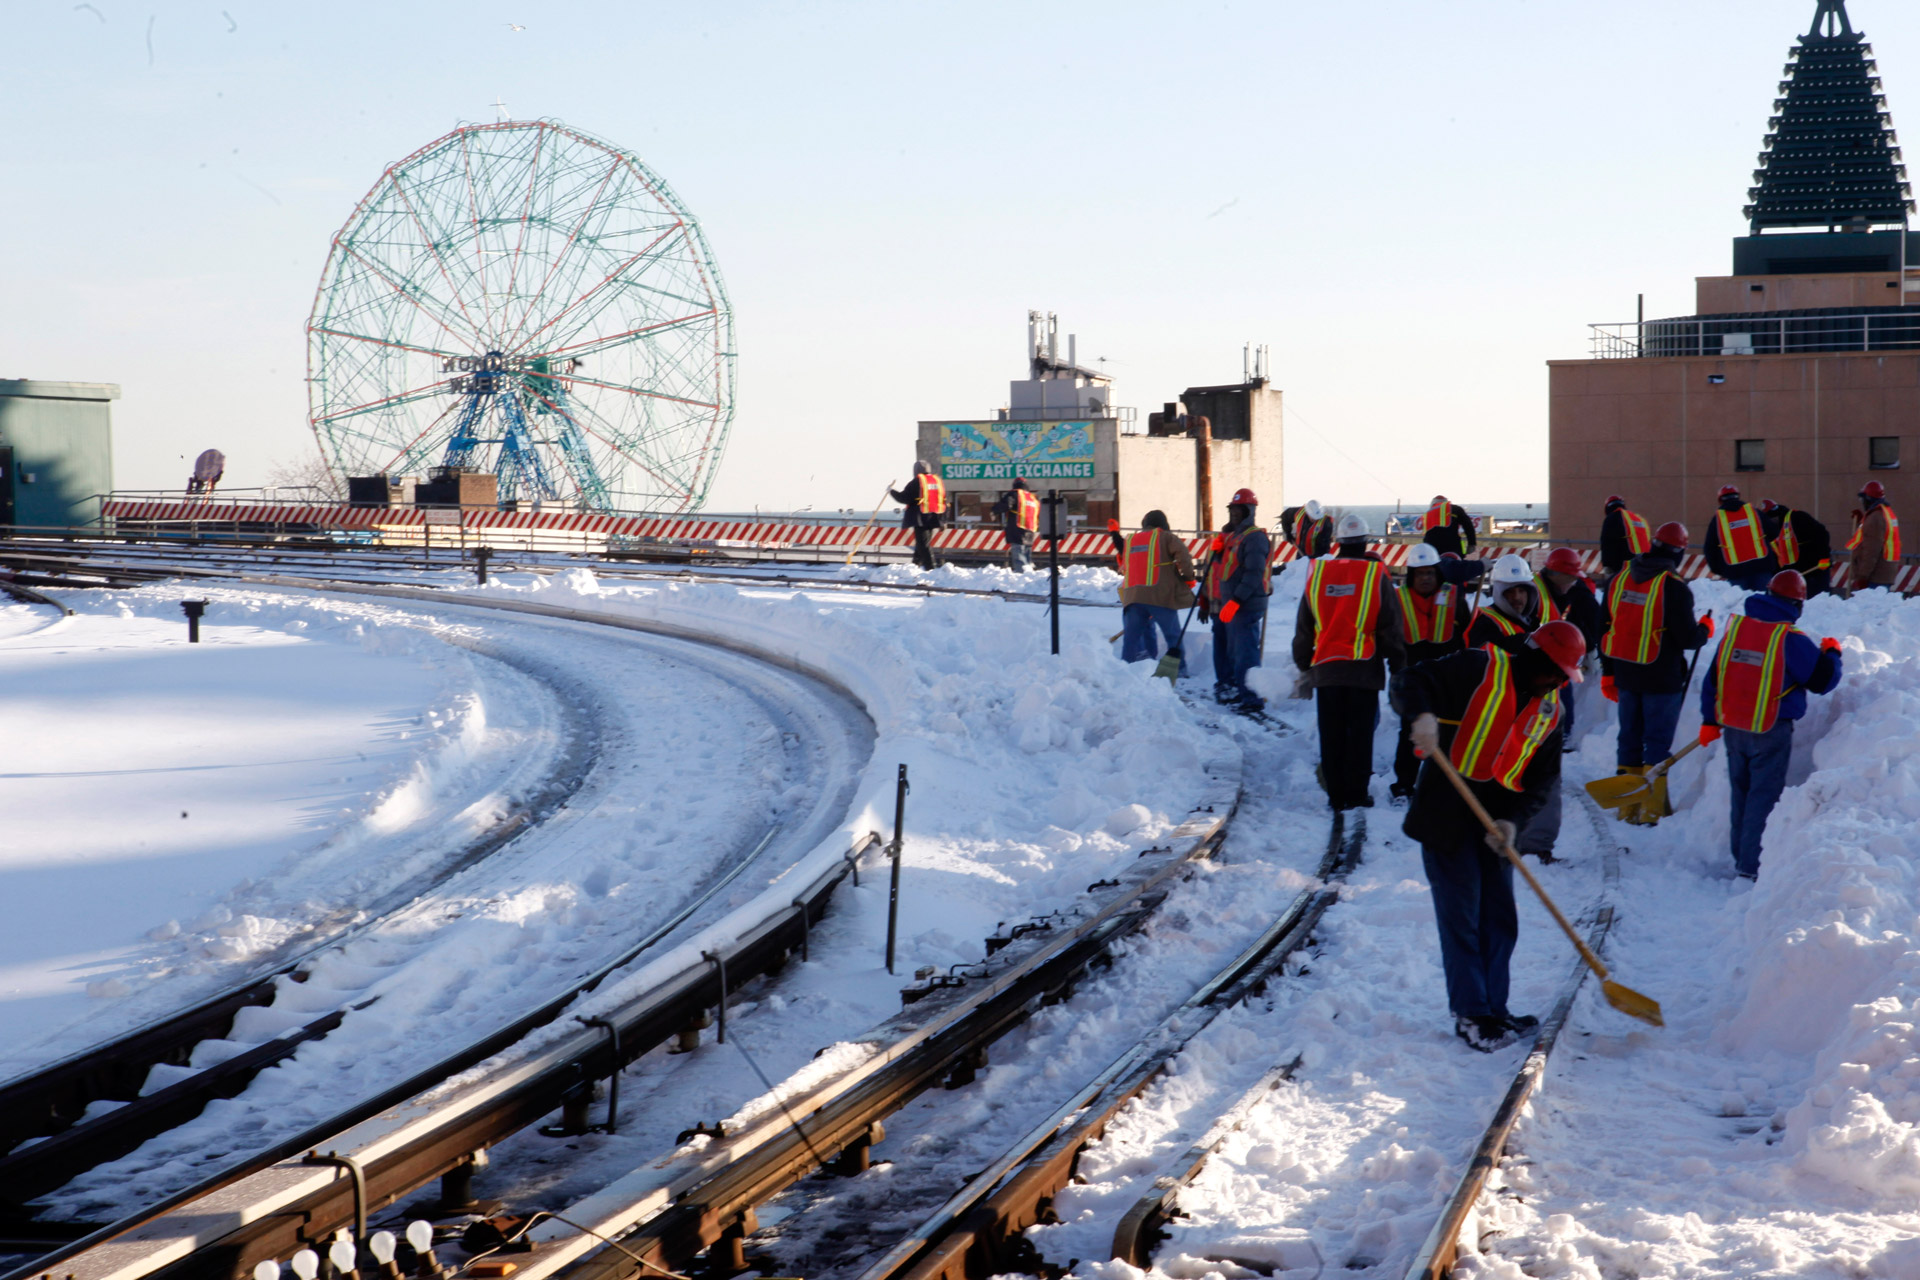 Transit workers clear tracks near Coney Island that were covered by snow during the December 2010 blizzard.